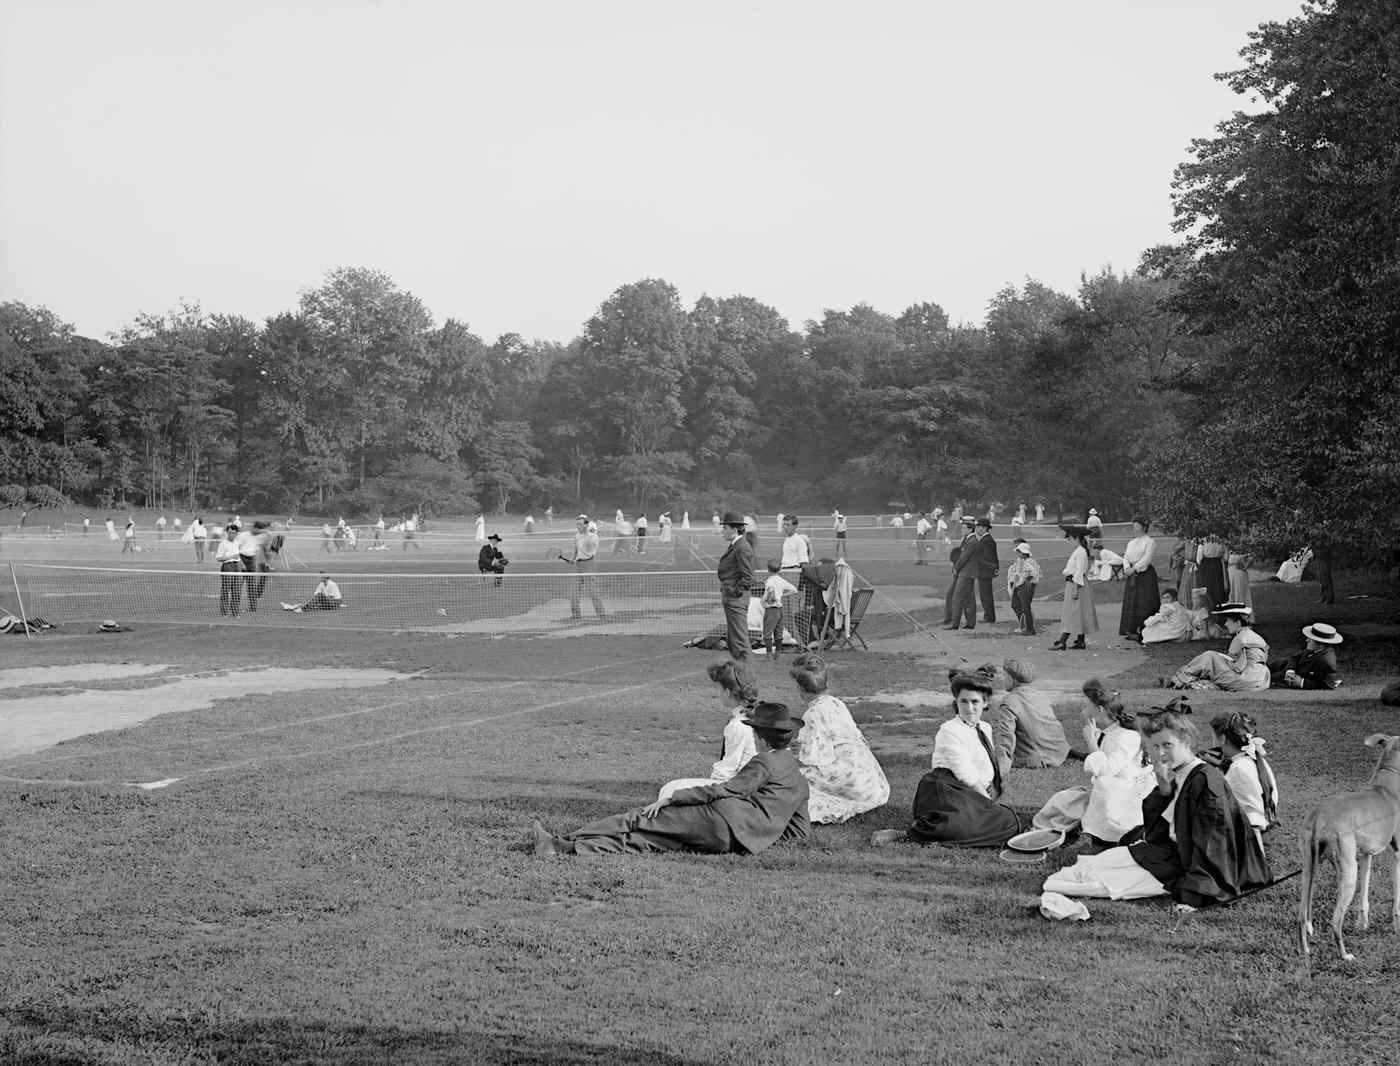 Tennis Courts, Central Park, New York City, 1900